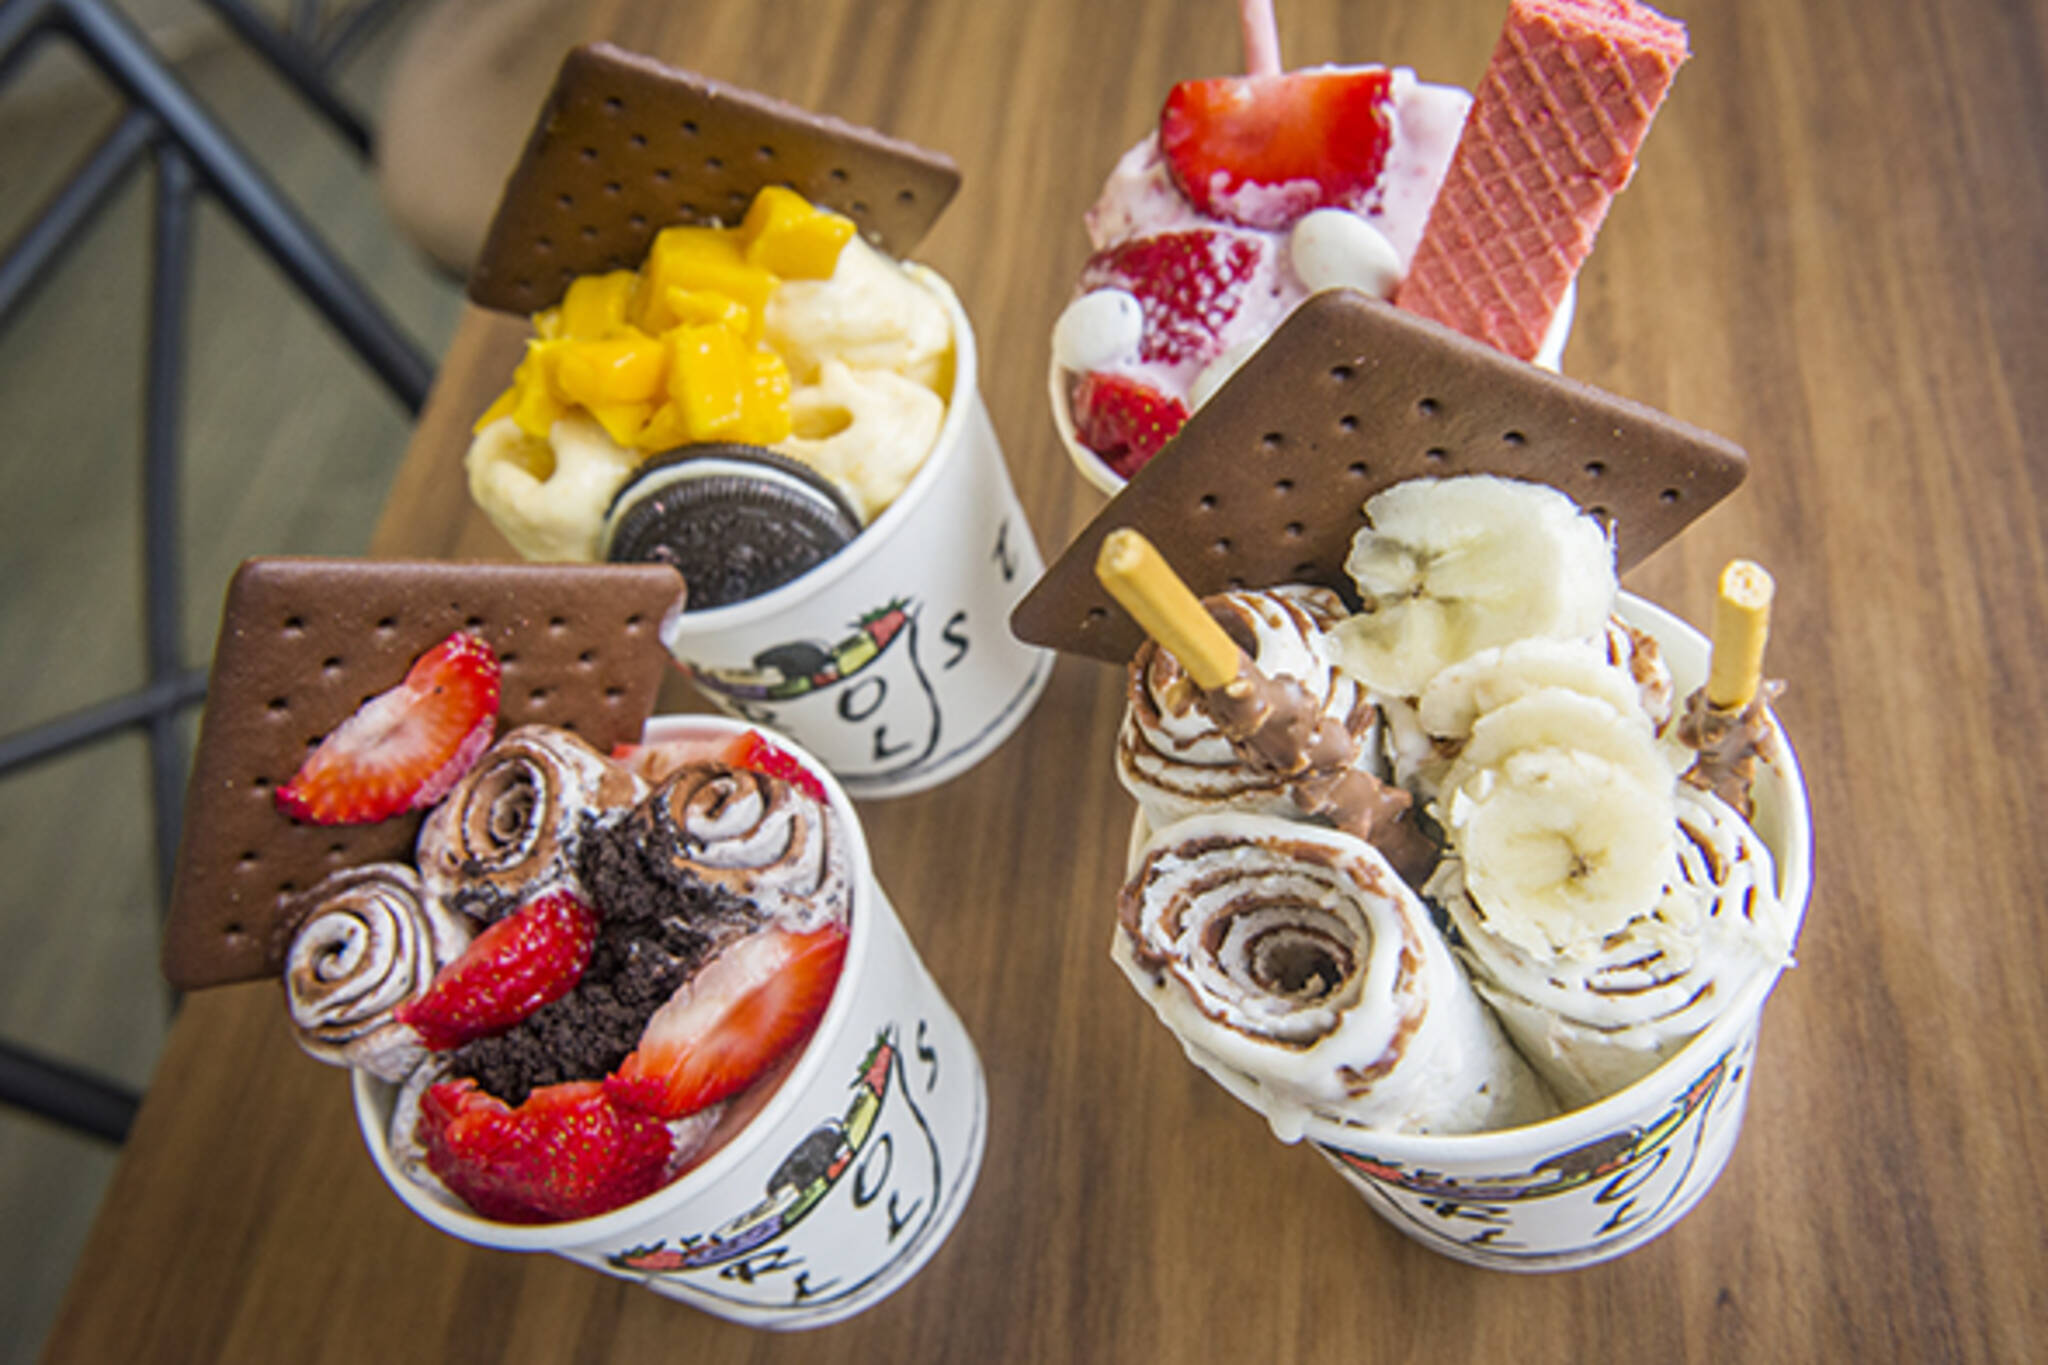 On a roll: Thai rolled ice cream brings fresh new flavors